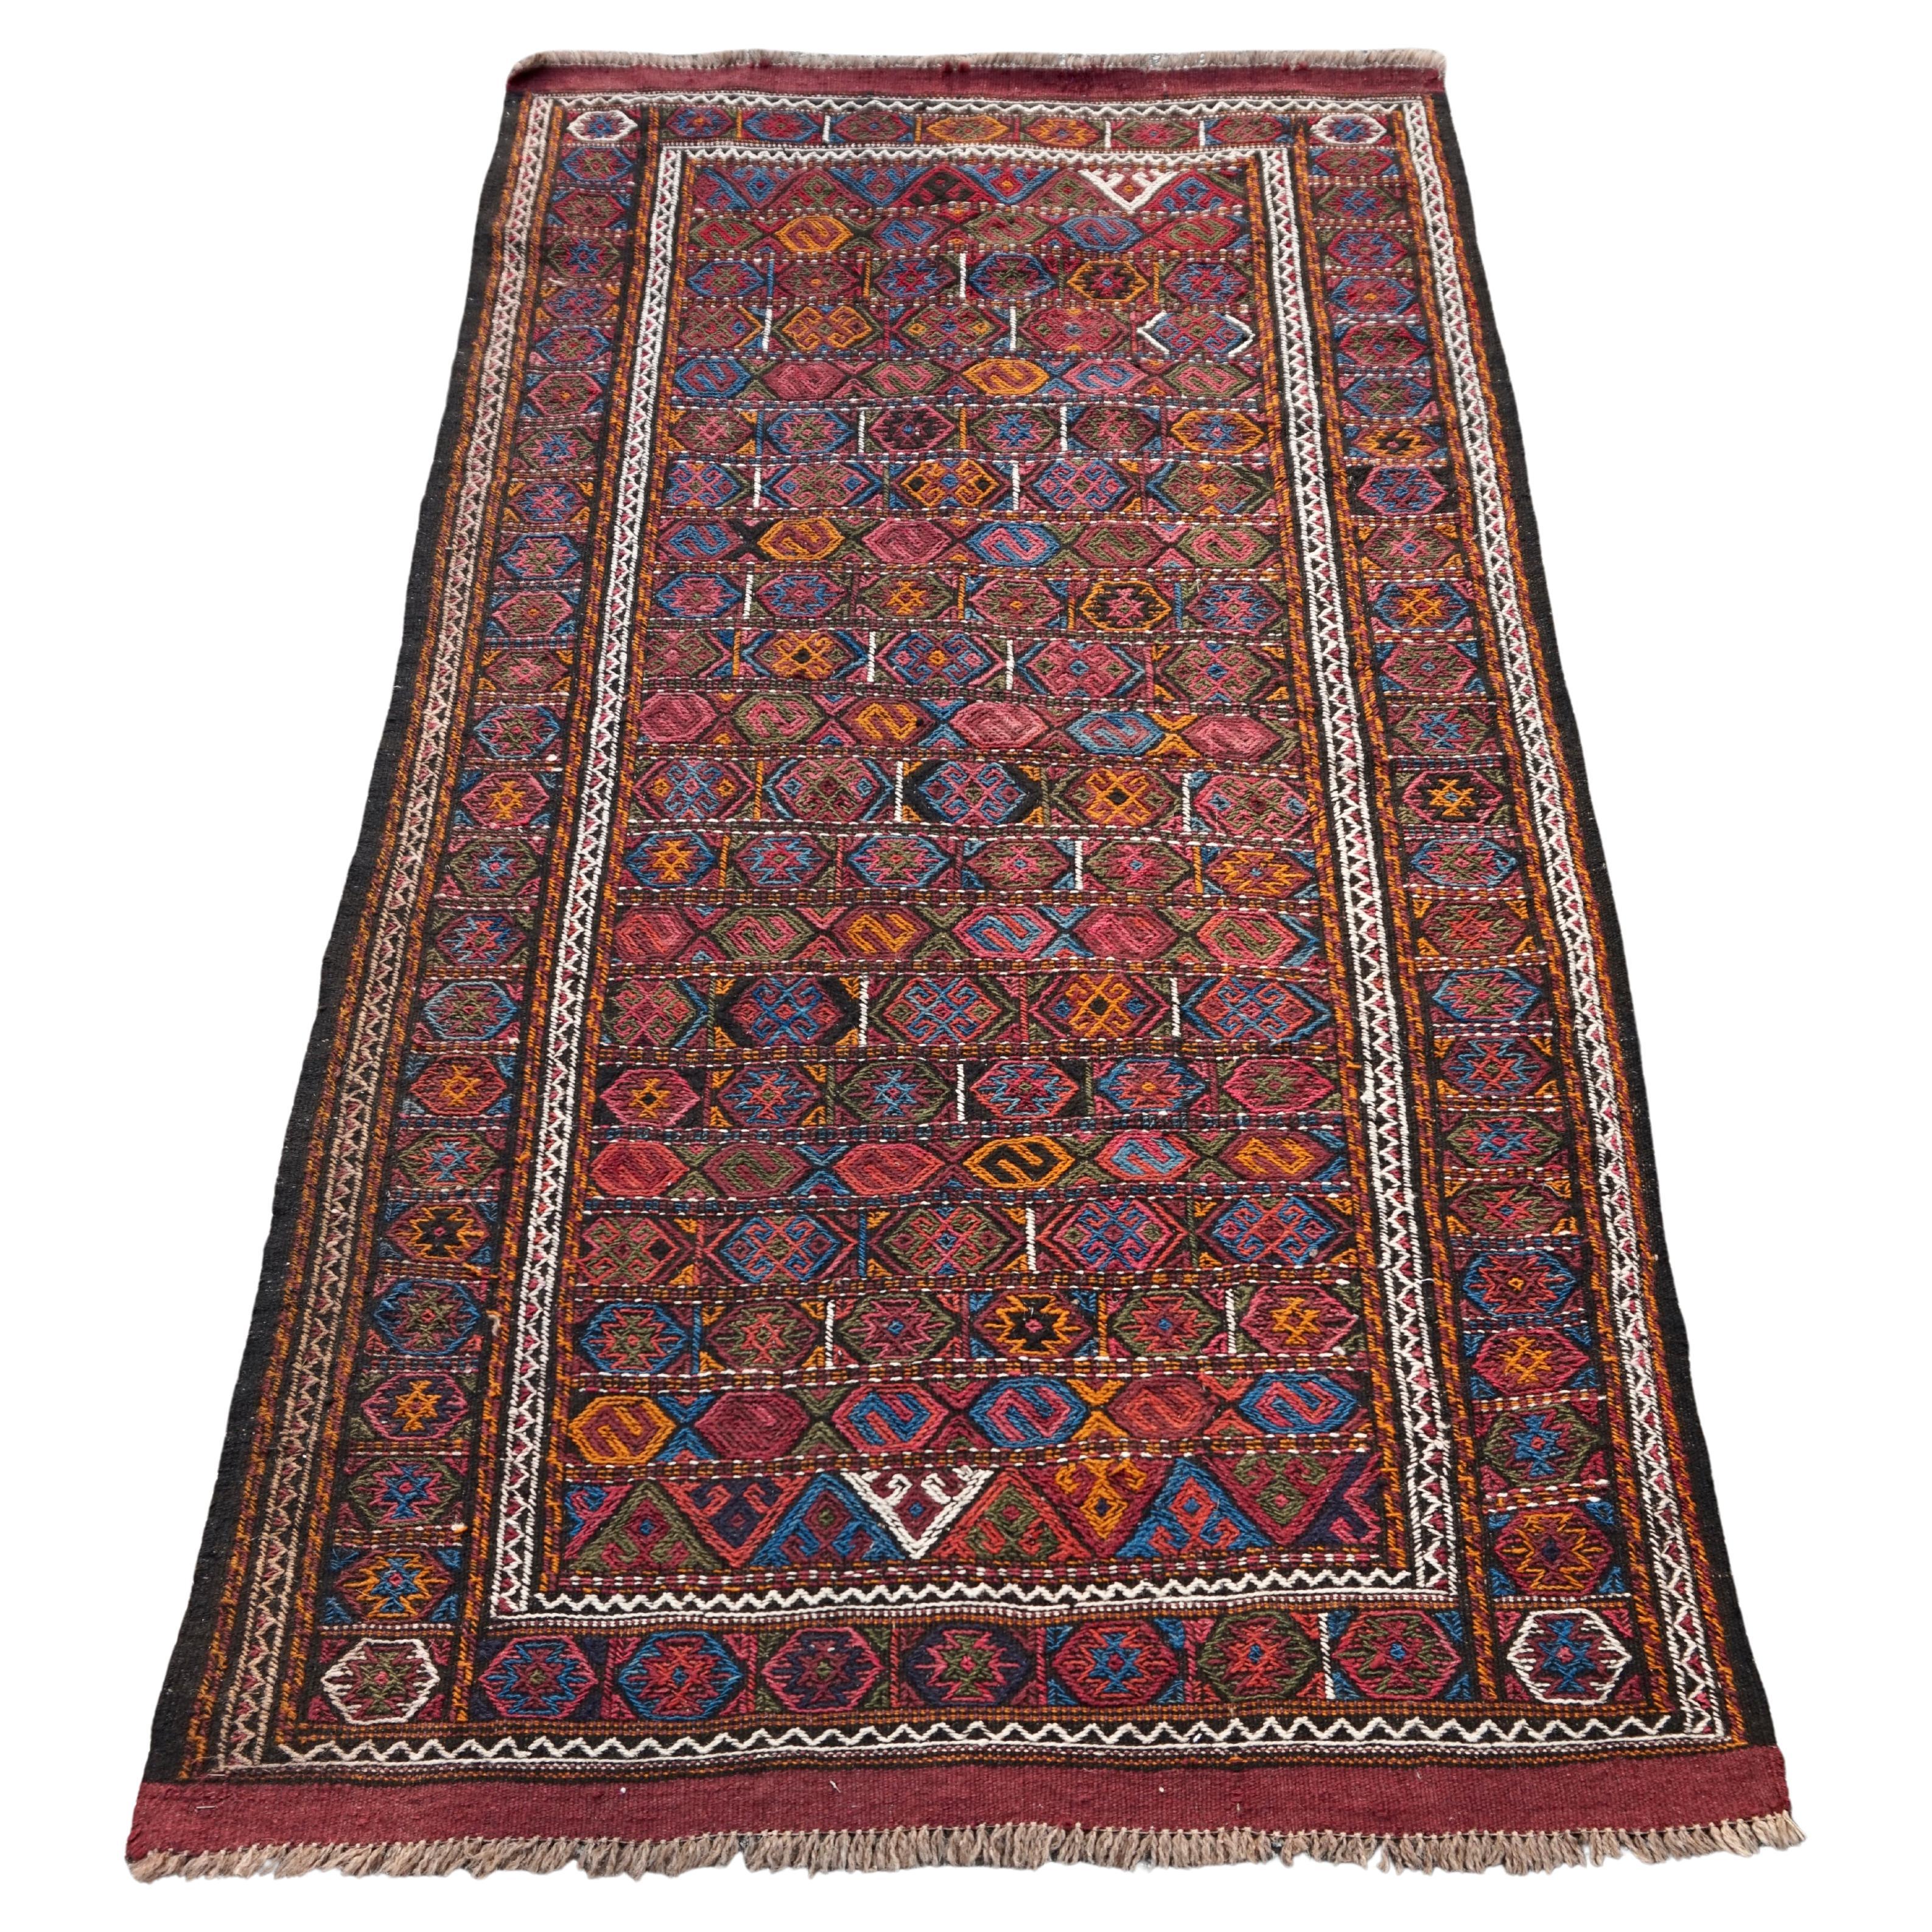 Rare Old Stock Hand-Knotted Central Asian Nomadic Tribal Flat-Weave Kilim